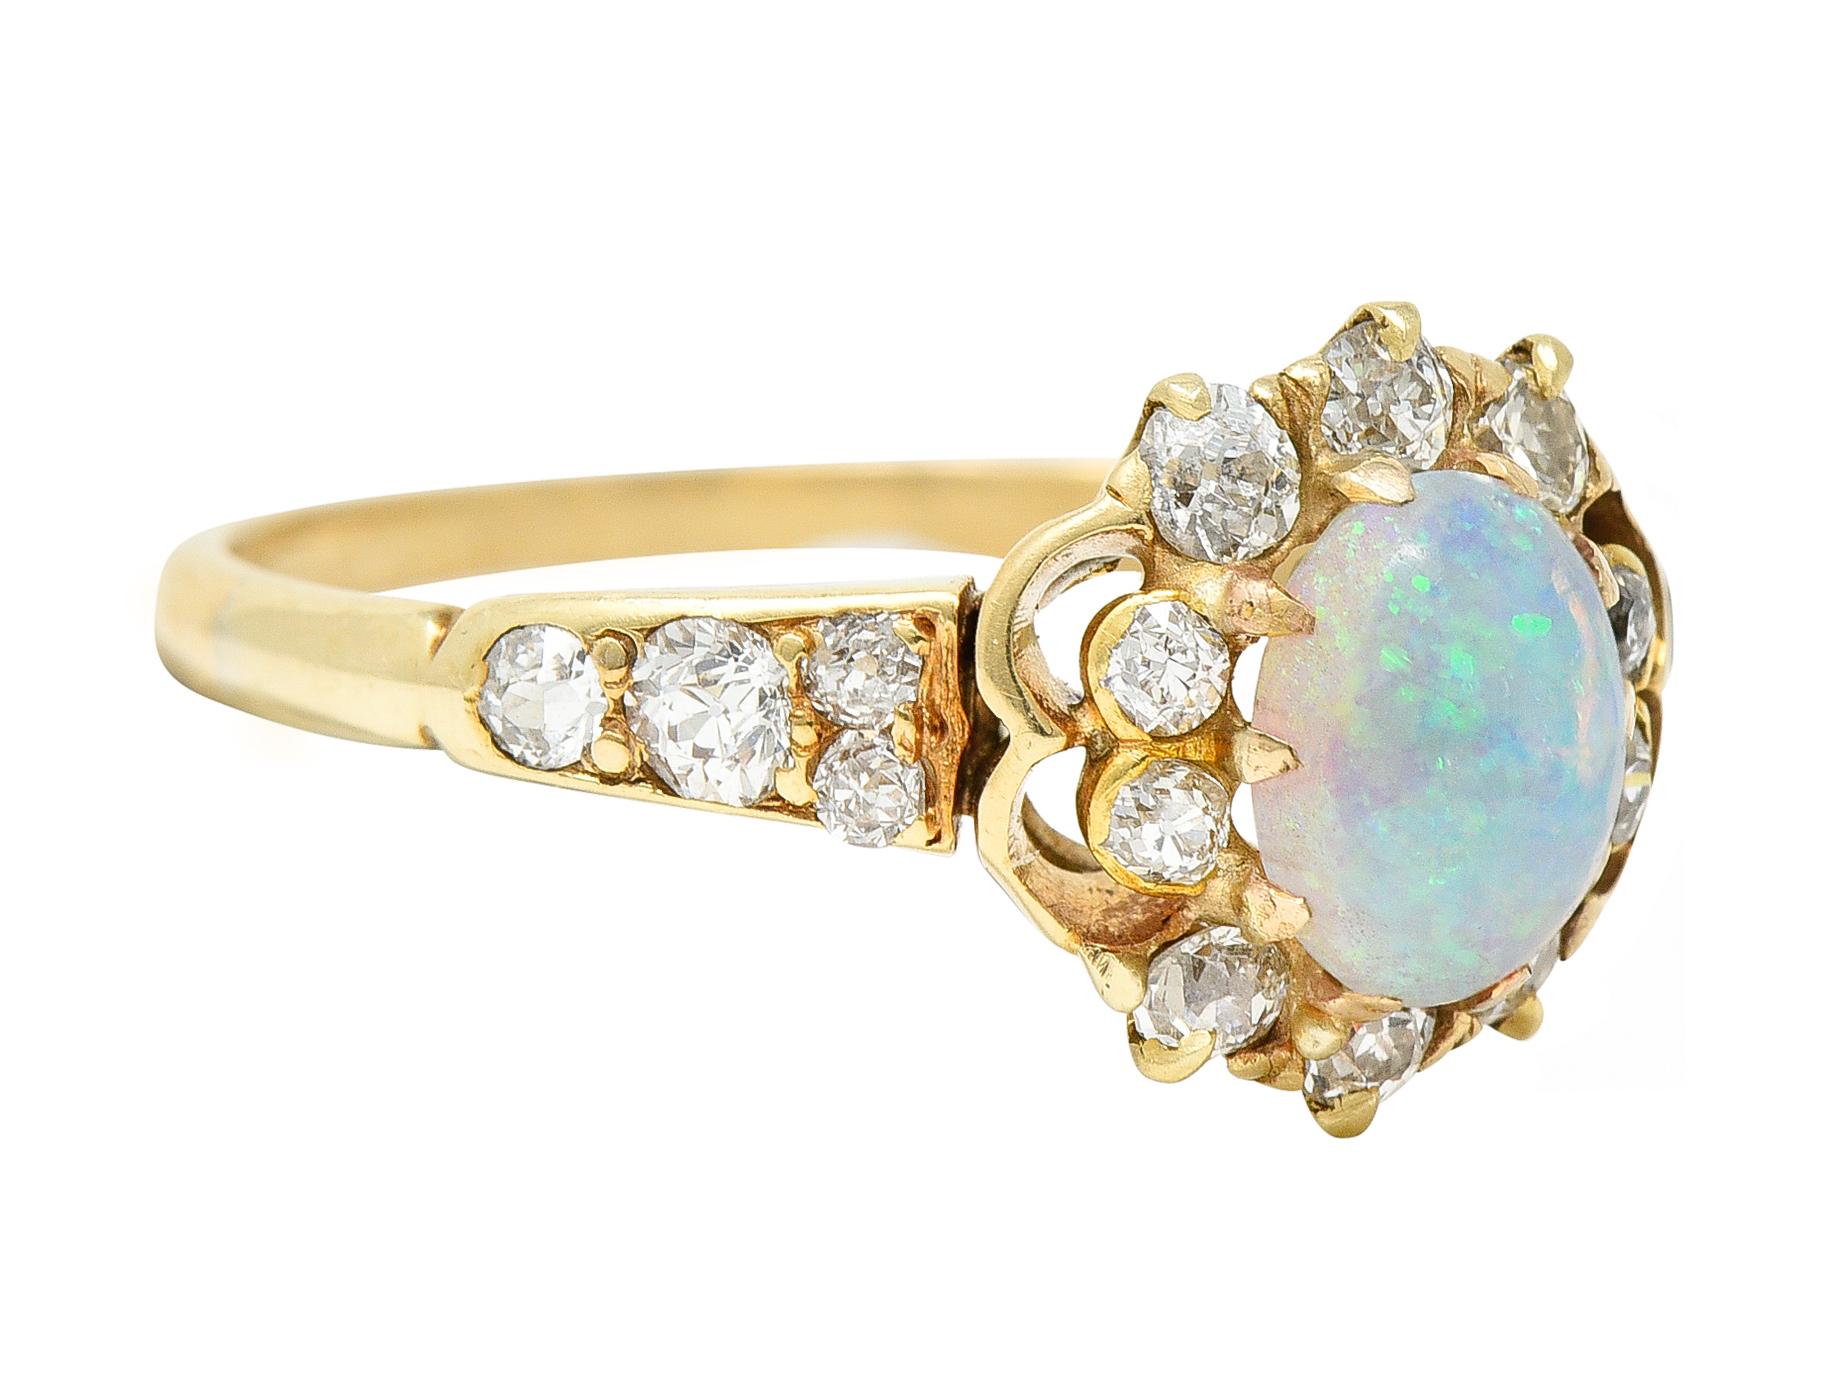 Belcher style cluster ring centering an oval opal cabochon measuring approximately 7.0 x 5.0 mm. Translucent white in body color with strong green, violet, and blue play-of color and a moderately strong orange glow. Surrounded by a halo of old